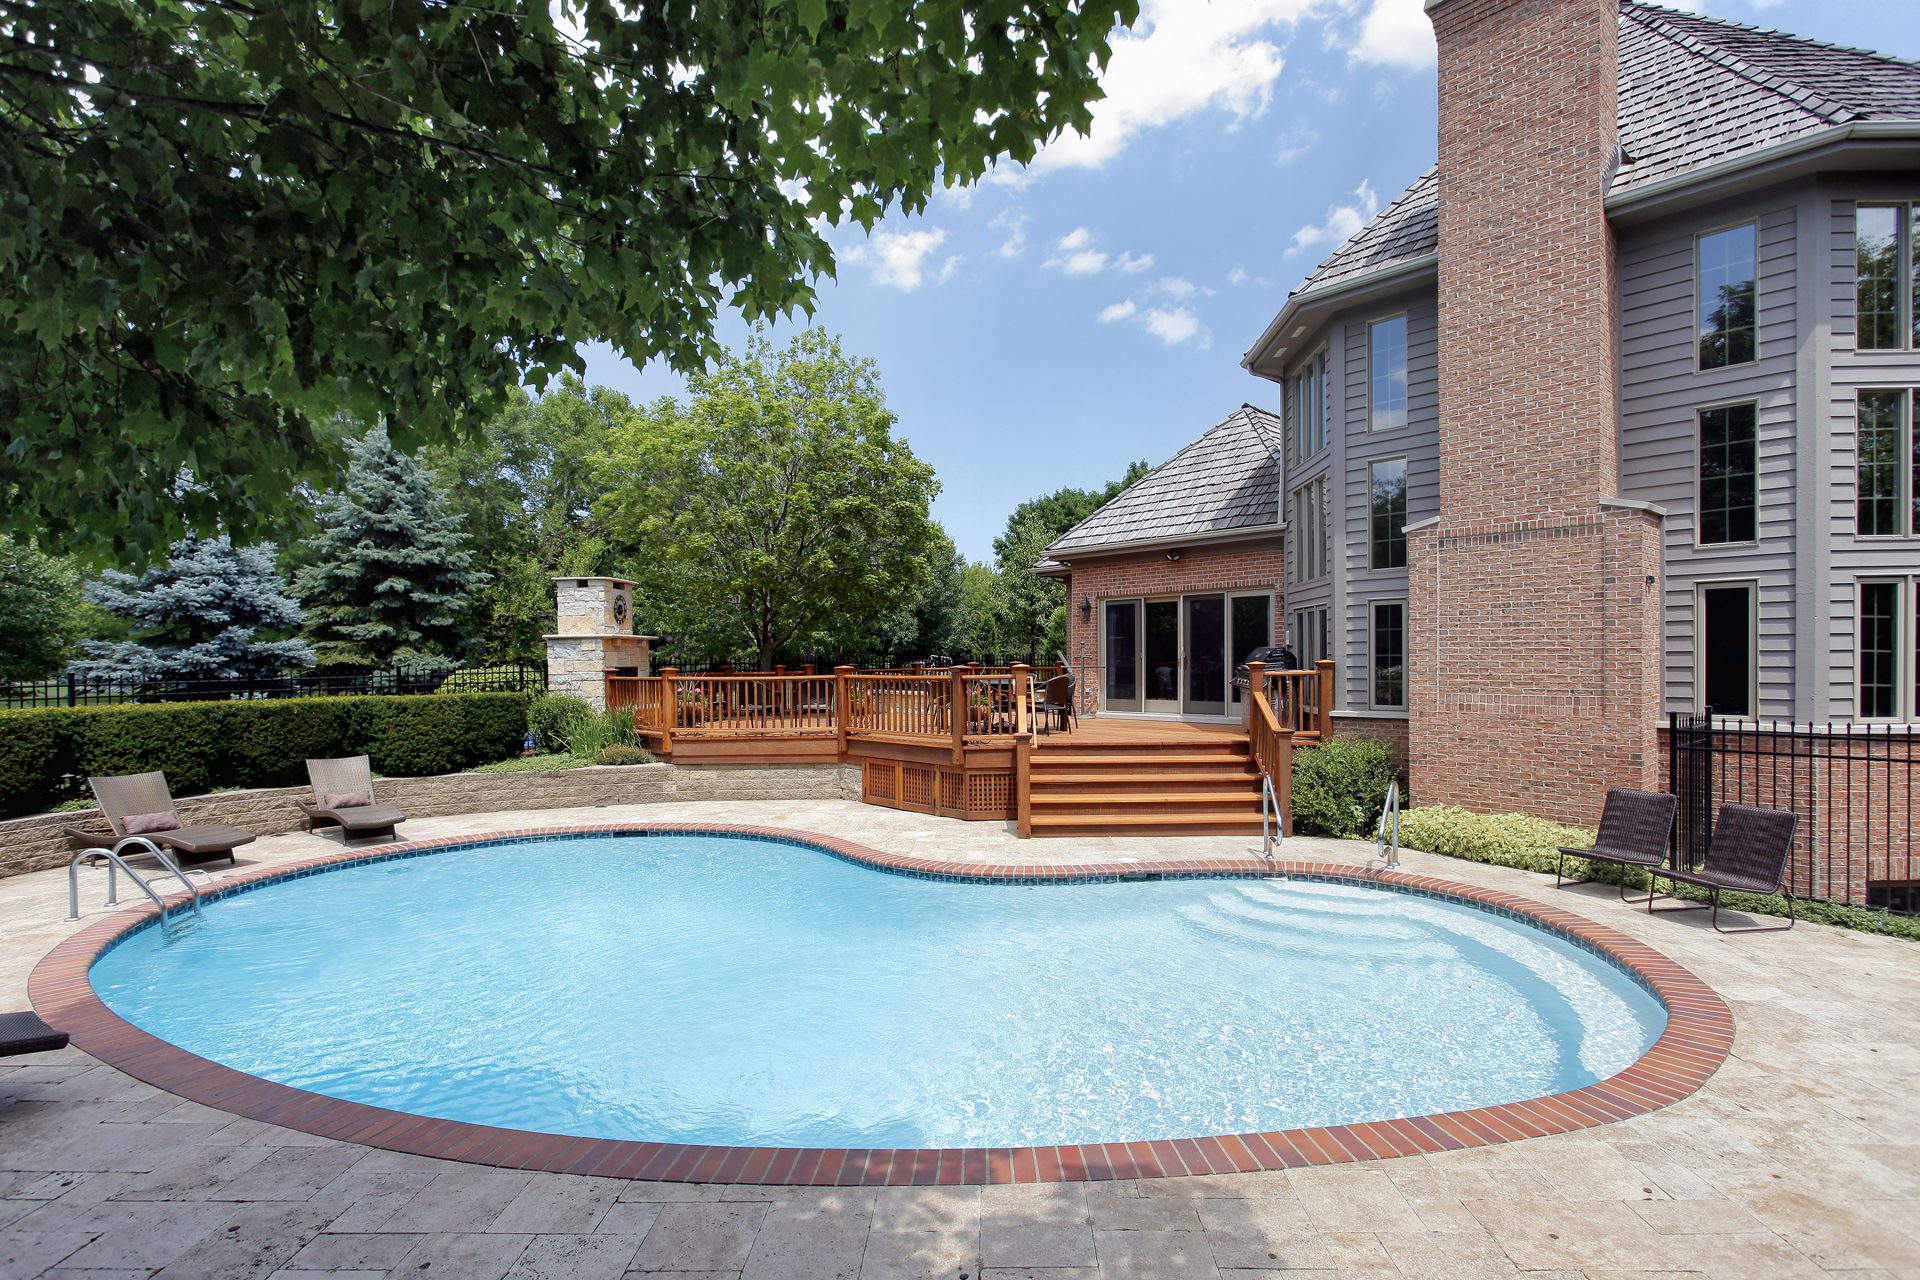 6 Reasons You Need A Pro To Pressure Wash Your Pool